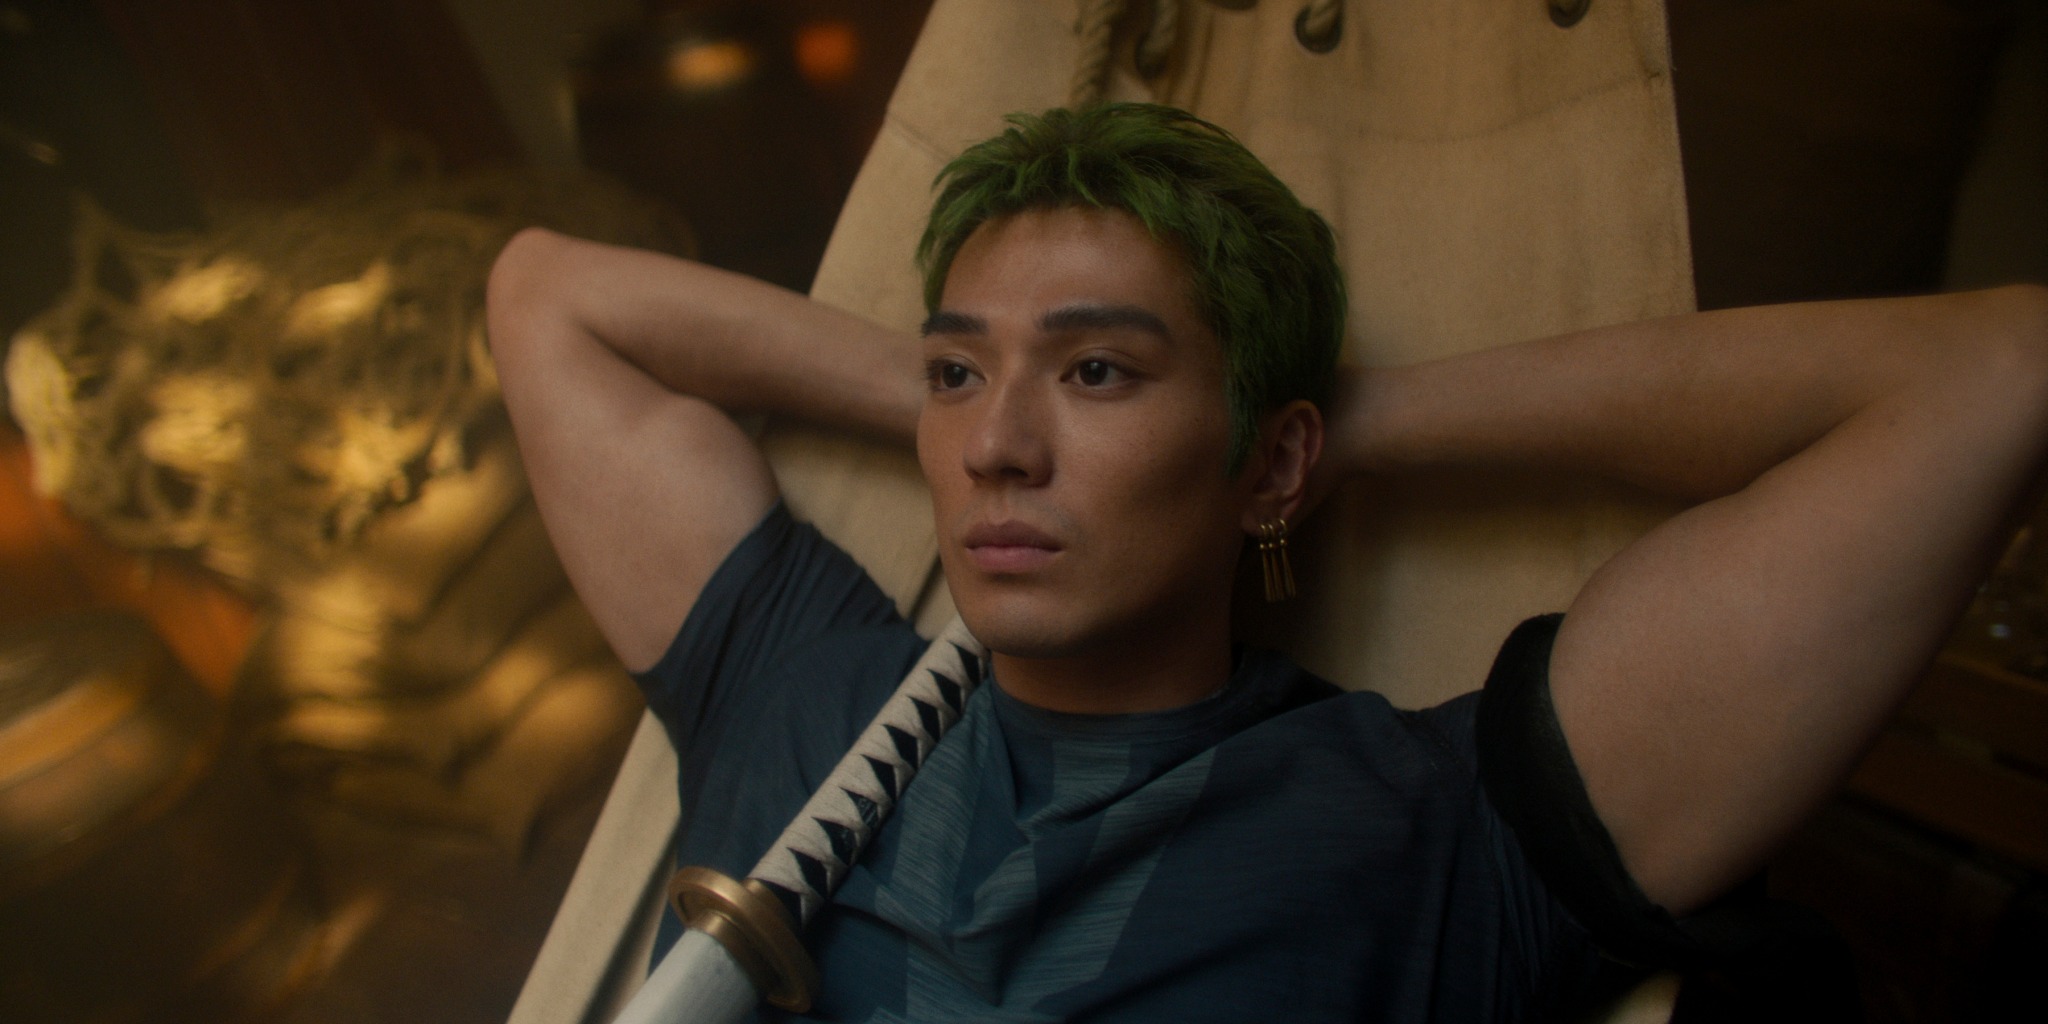 ONE PIECE Live-Action and My Crush on Roronoa Zoro, by Loshifa jothi